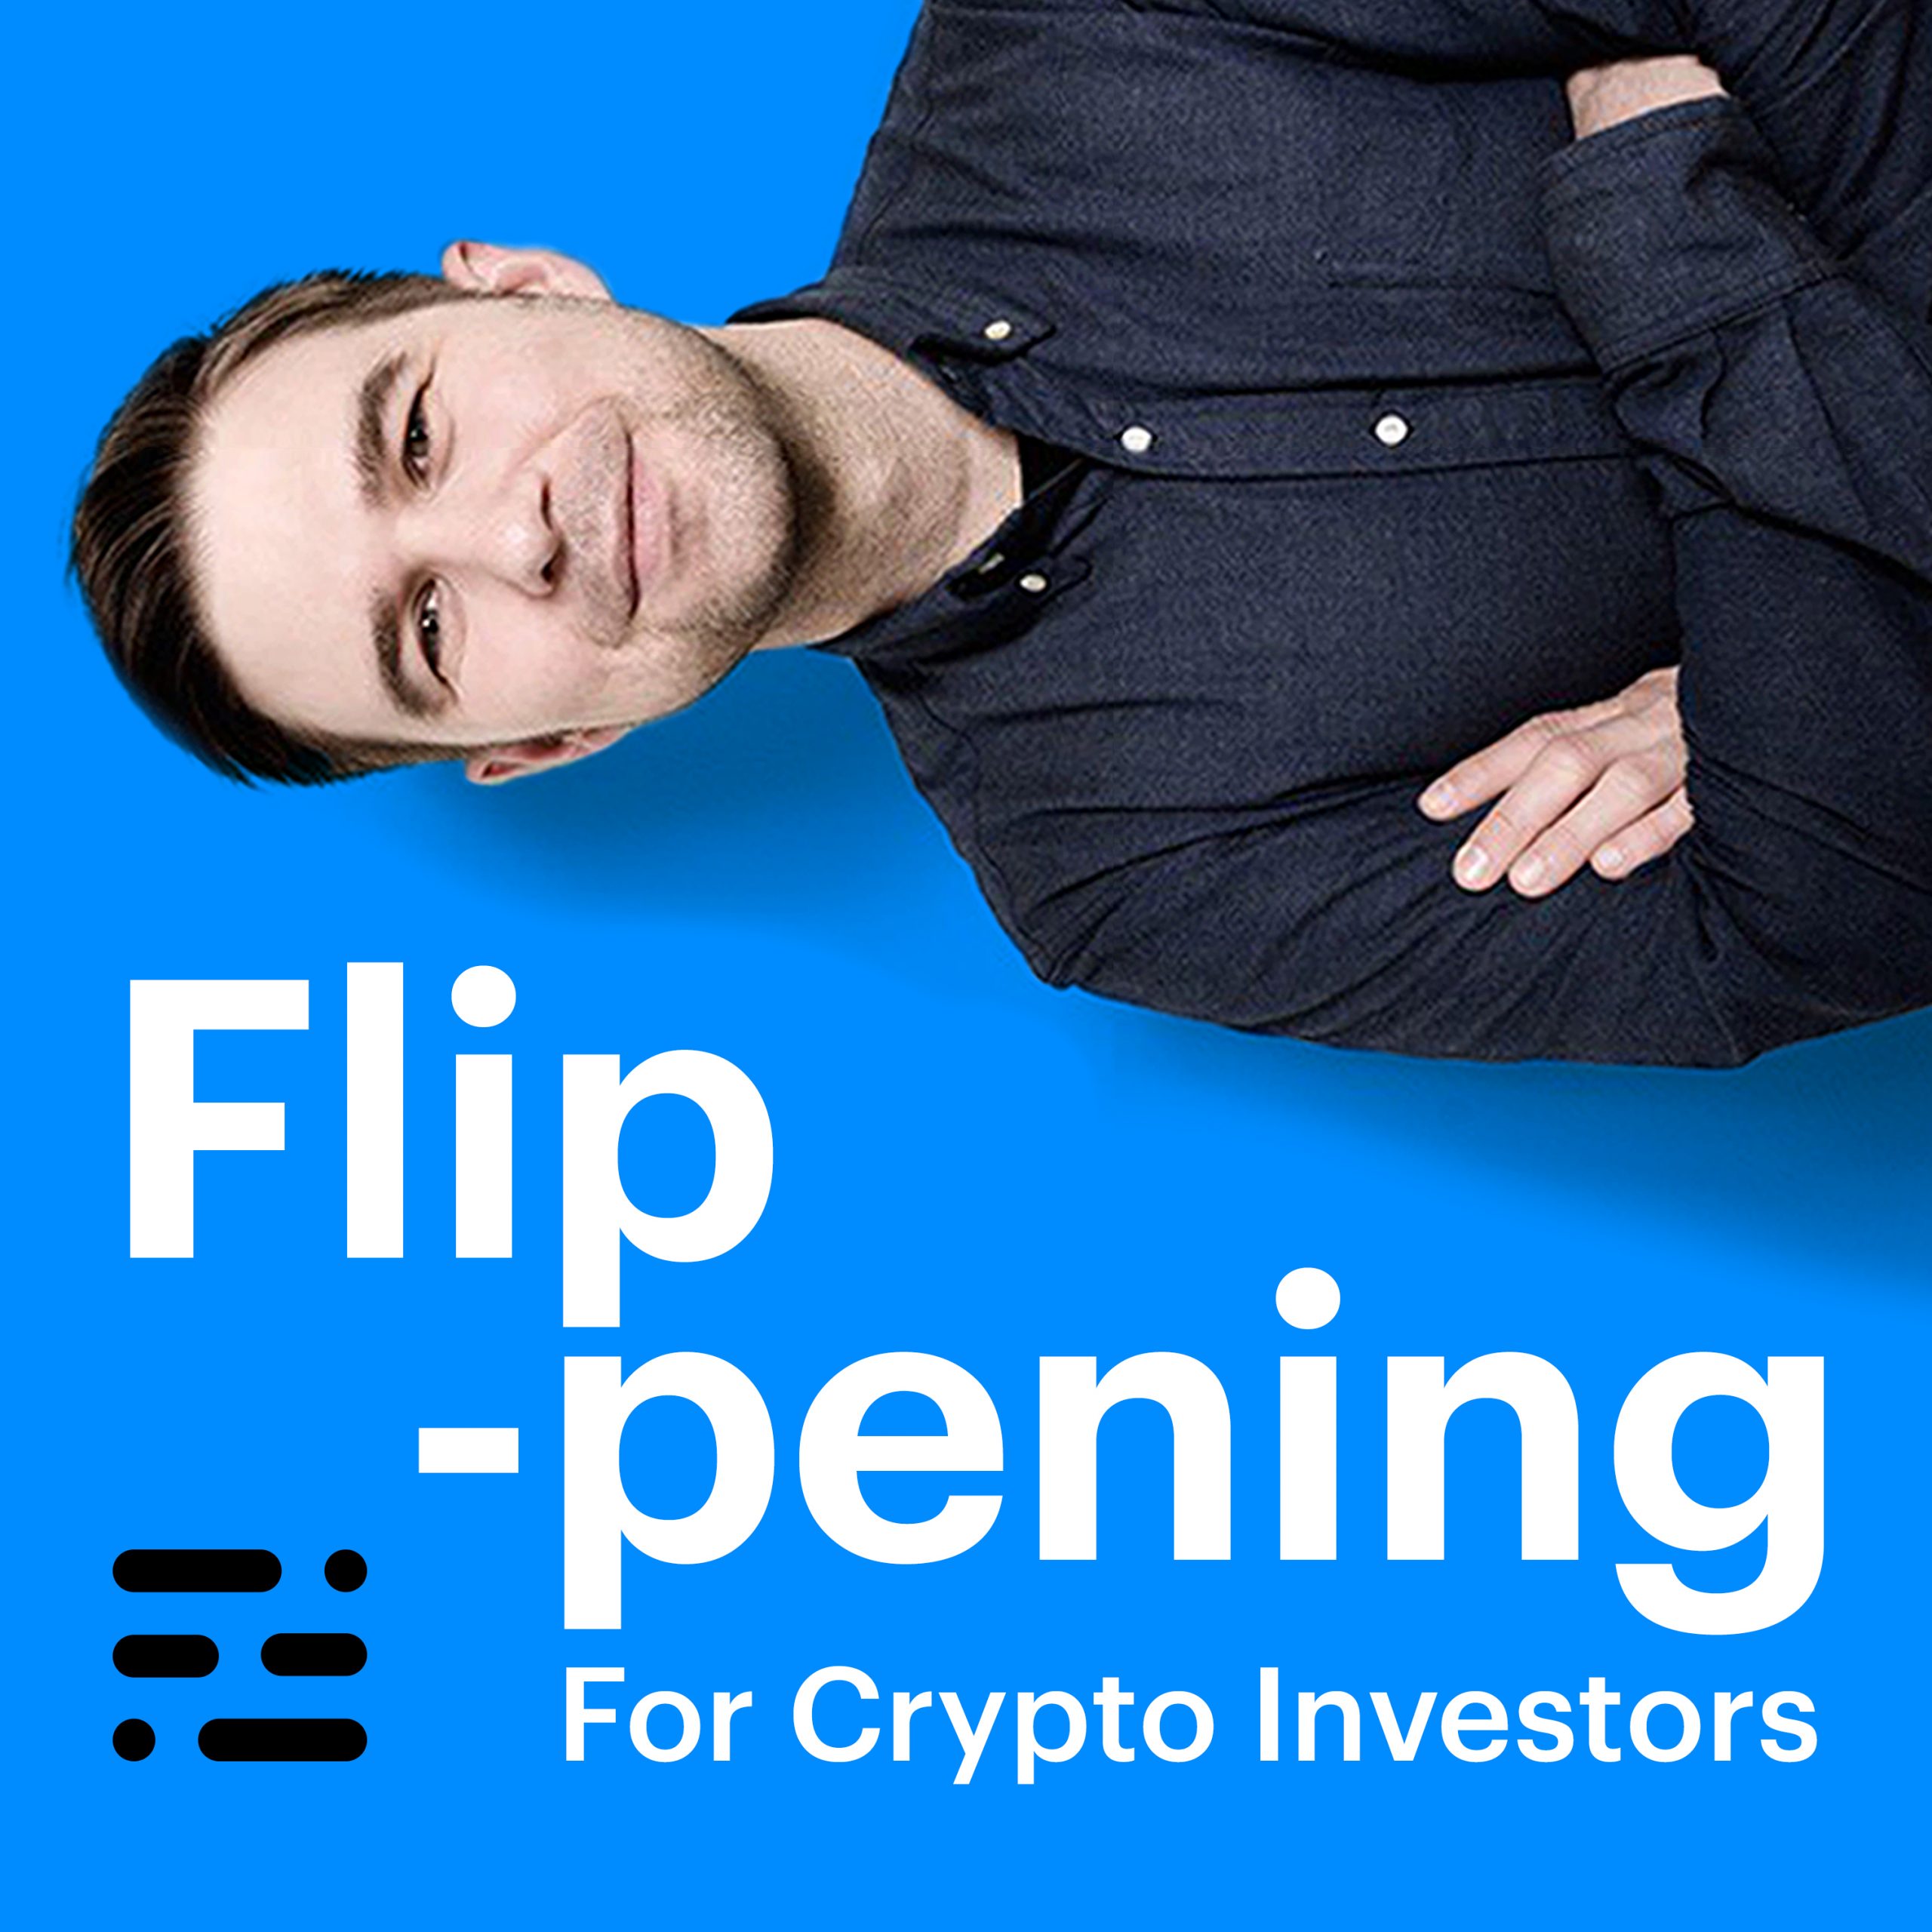 “Asia, Crypto, and The Coronavirus” - Joyce Yang of Global Coin Research on Flippening